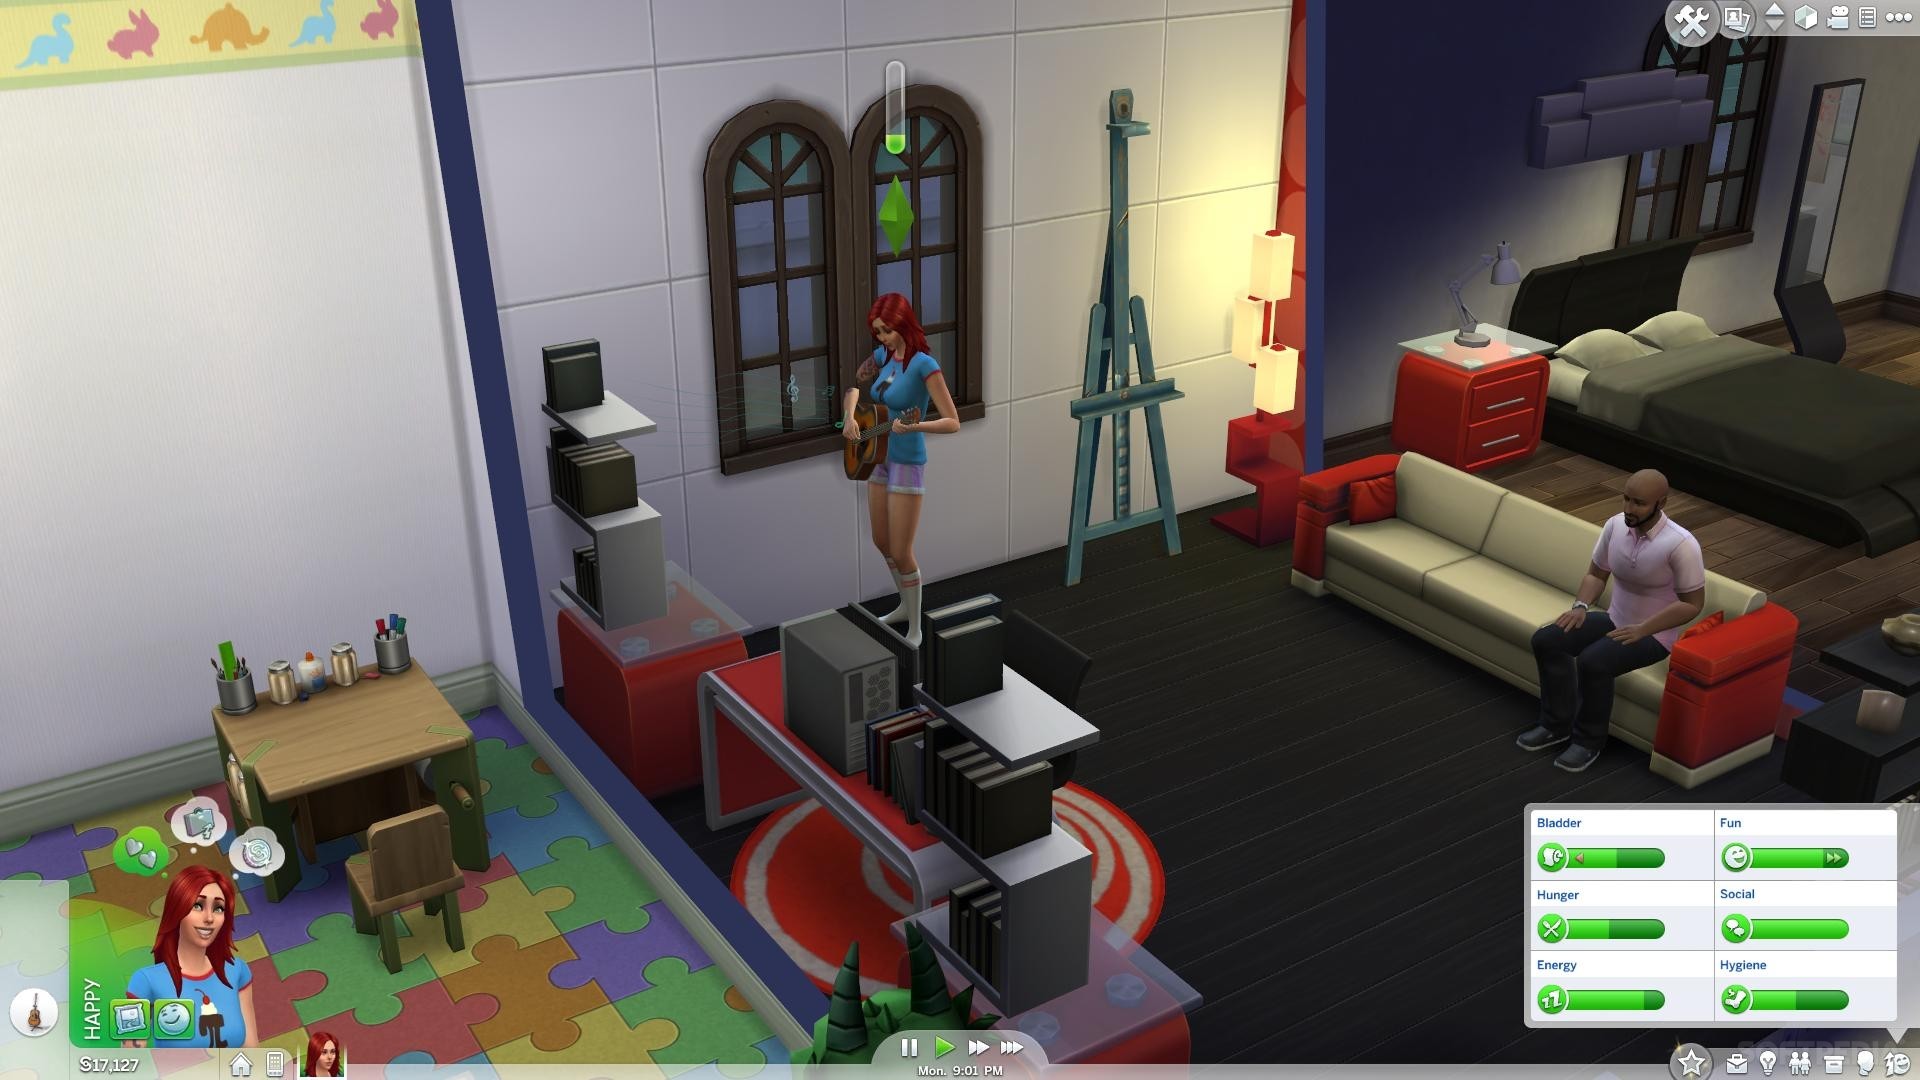 download sims 4 without origin online free